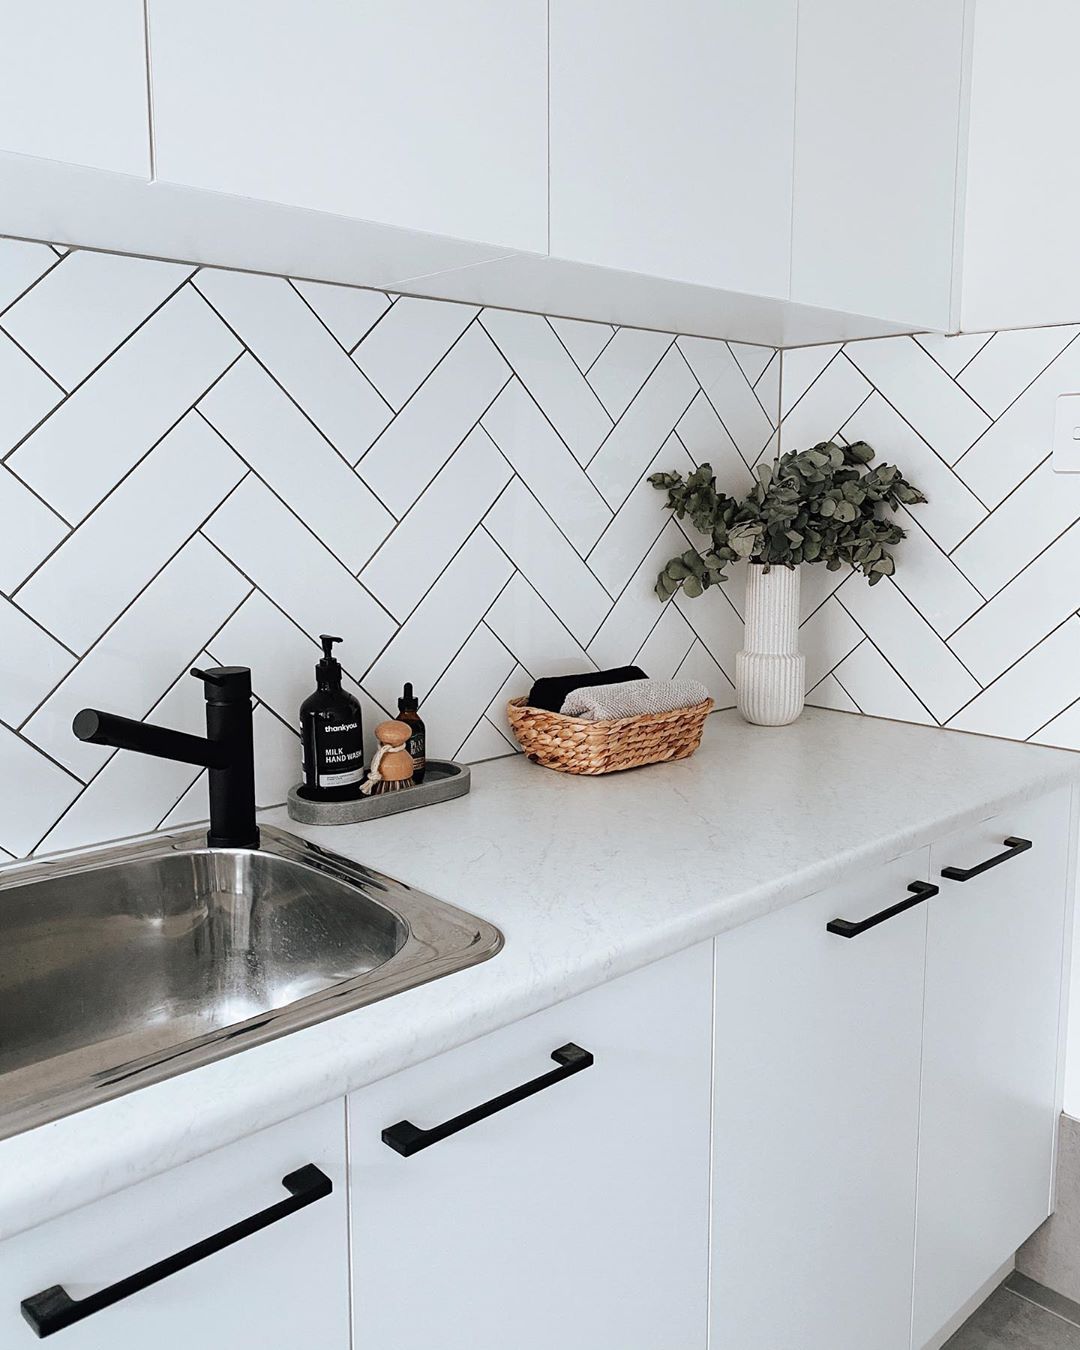 Updated Kitchen with White Cabinets and Subway Tile Backsplash. Photo by Instagram user @housetwentyfive